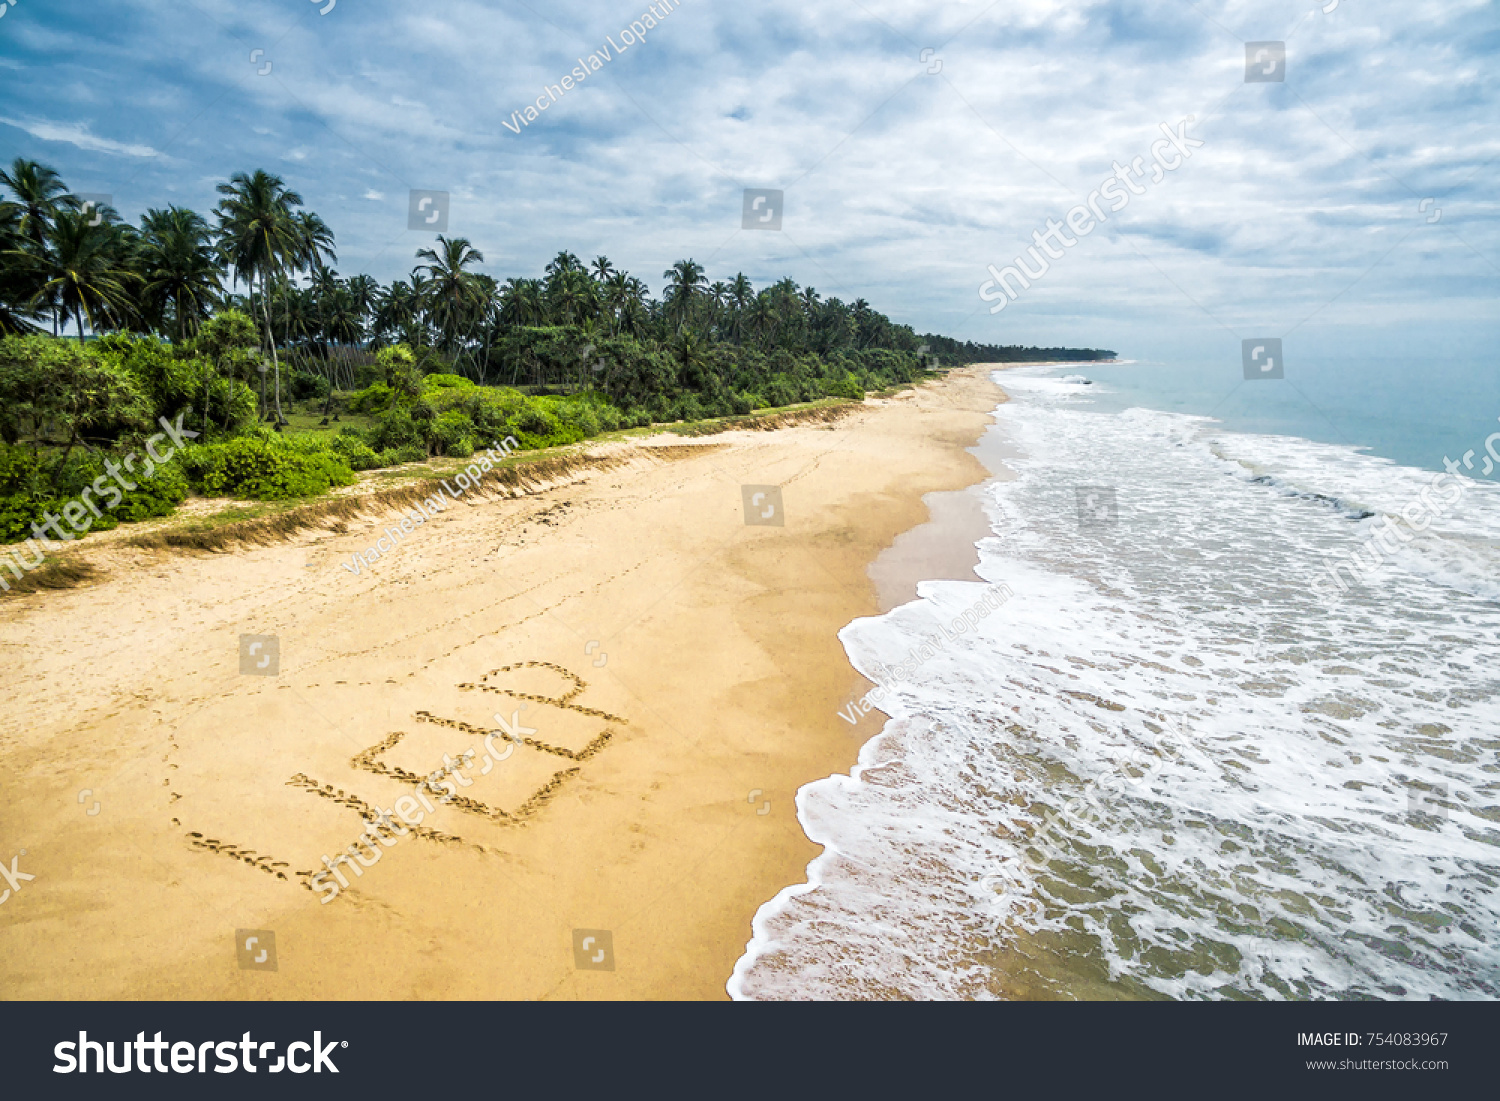 Deserted beach of uninhabited tropical island, sand with inscription HELP, lost in sea calls for help. Aerial view of empty ocean island shore with palms. Shipwreck, sos, island and castaway theme. #754083967